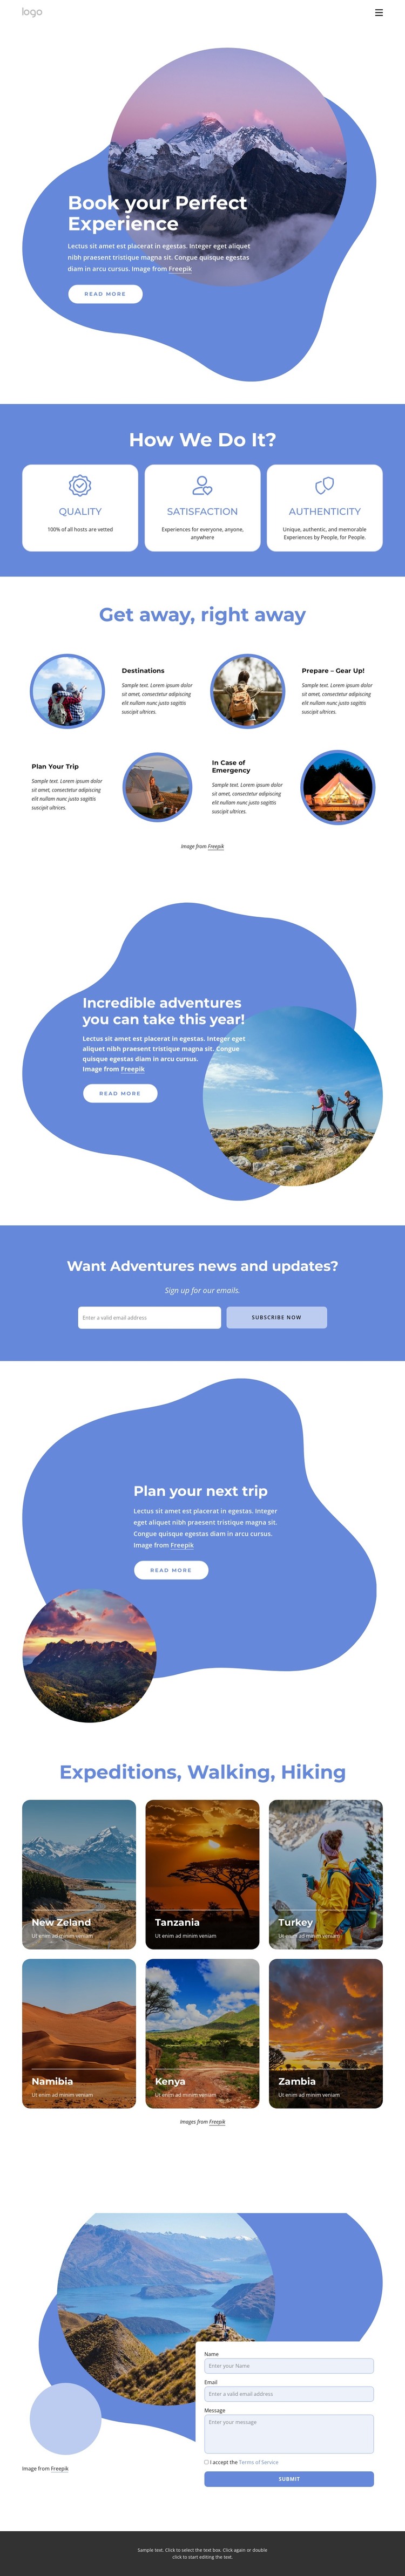 Book your perfect vacations WordPress Theme